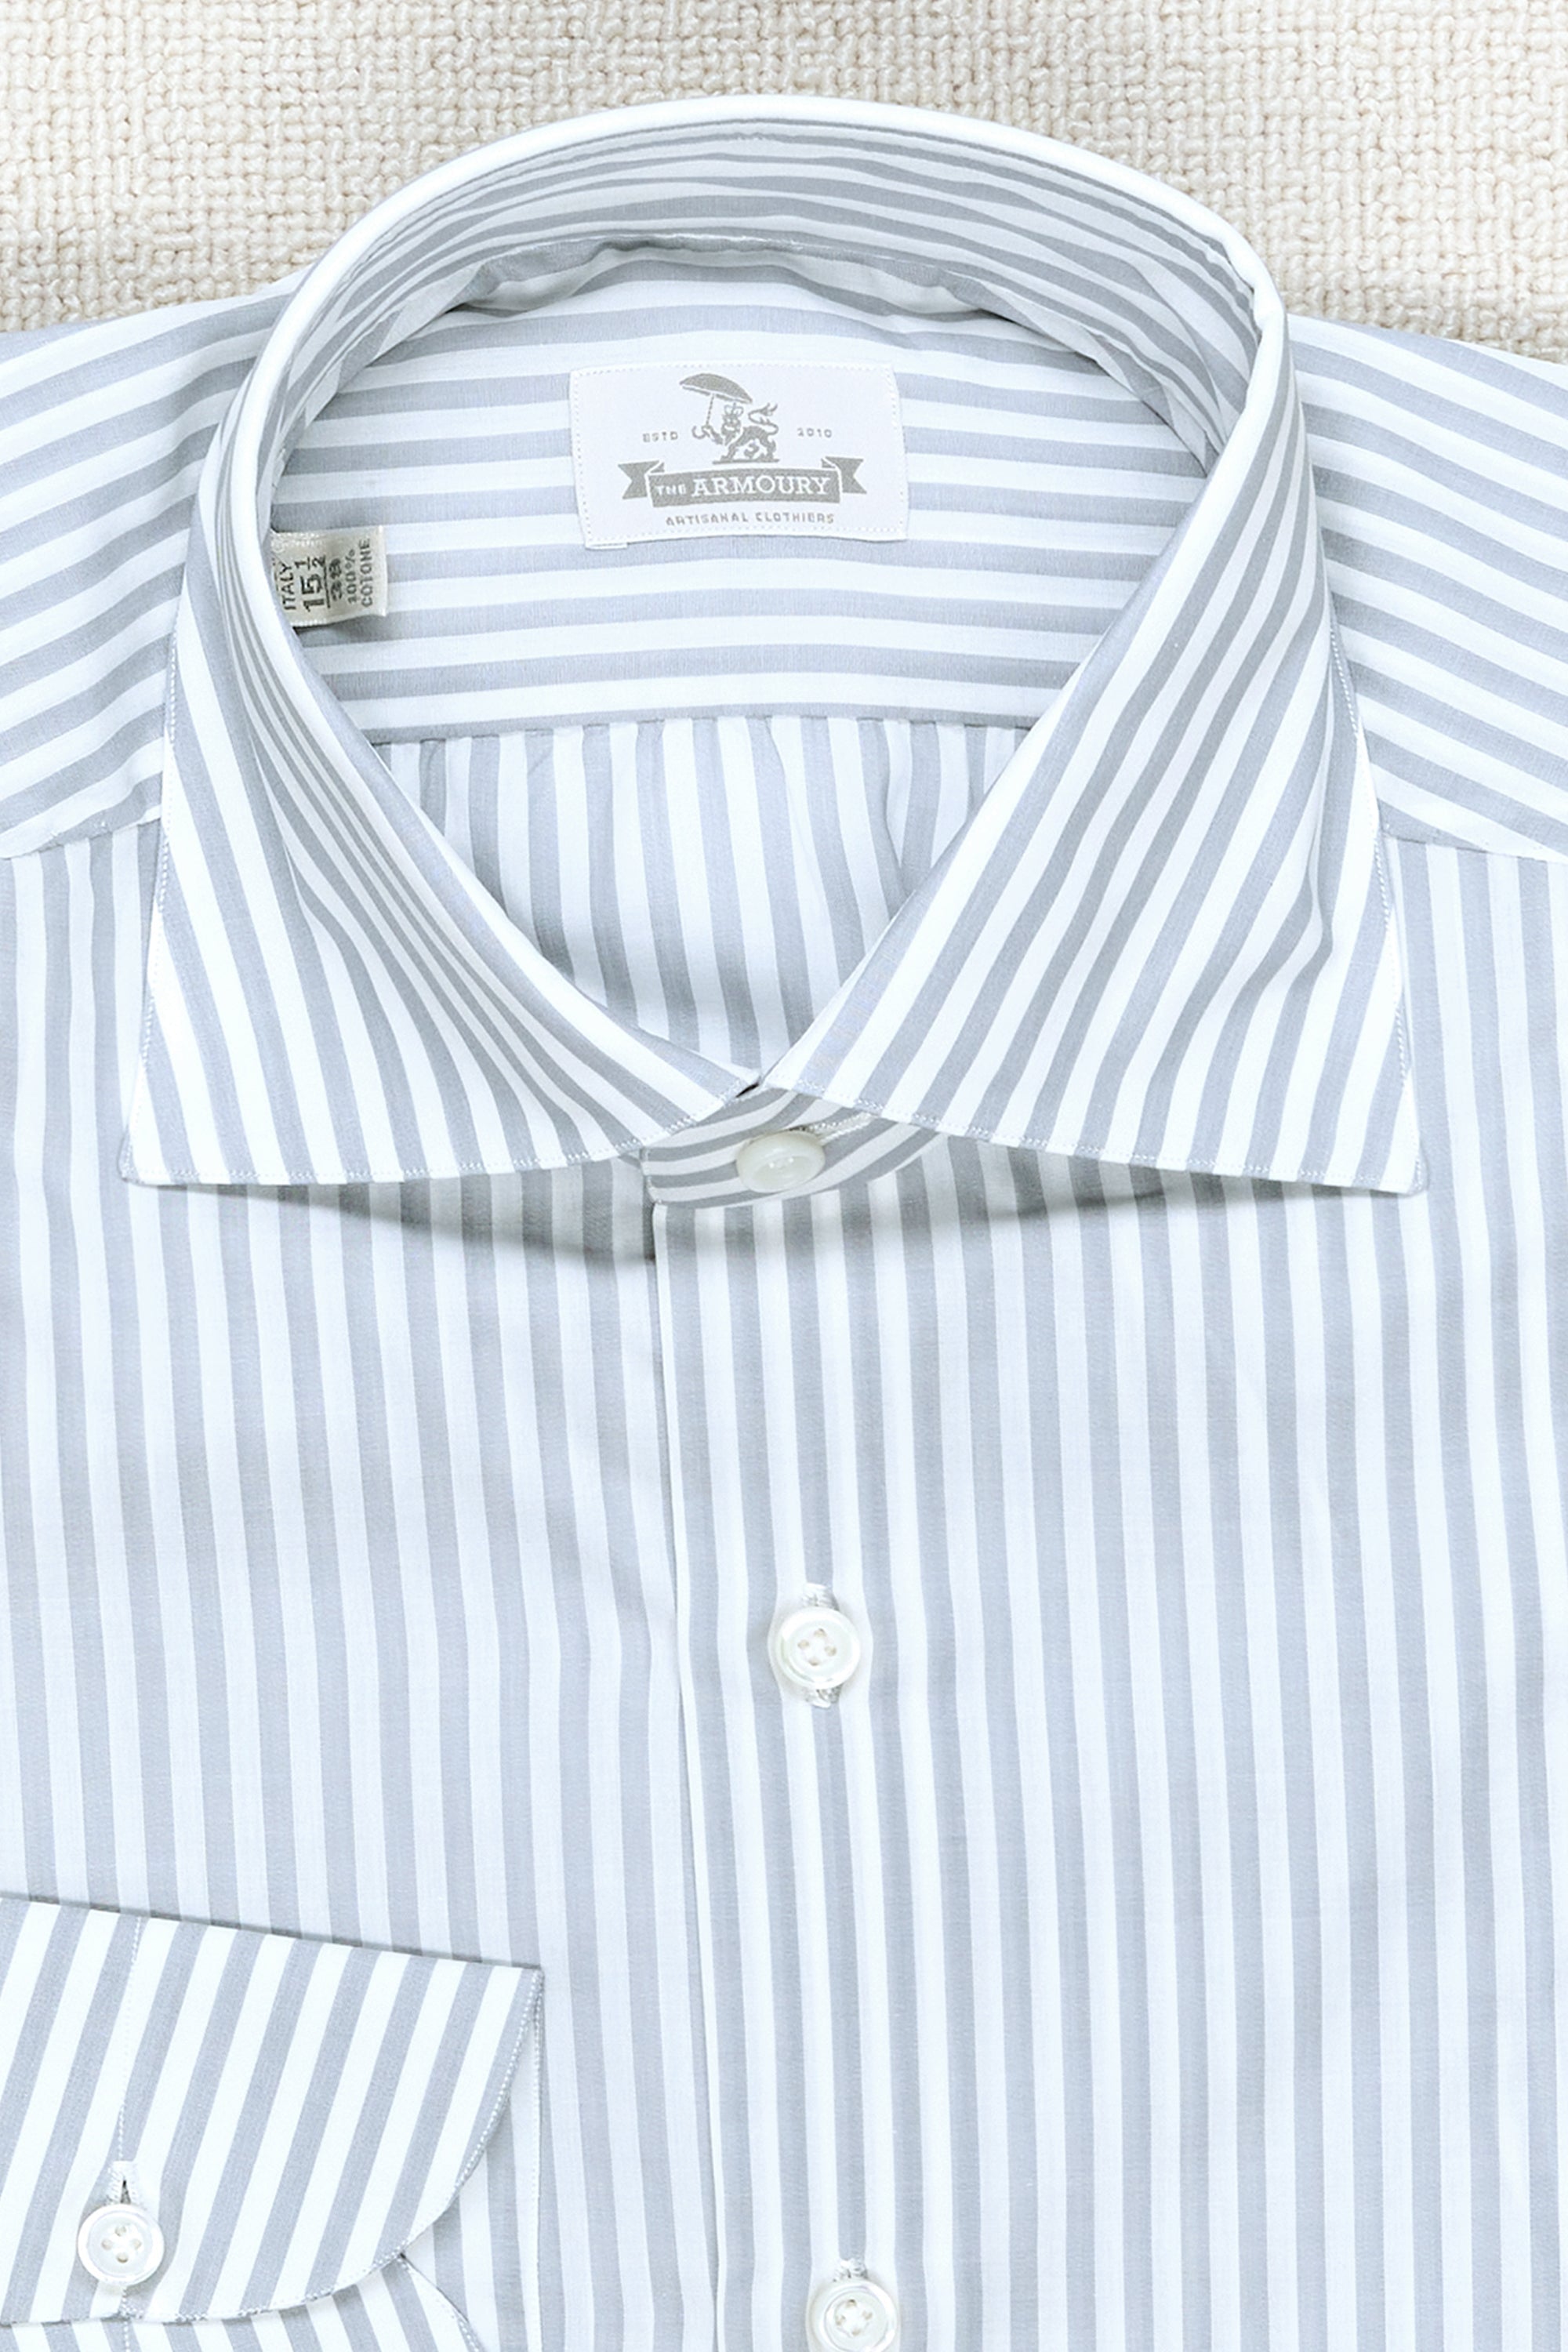 The Armoury Exclusive Carlo Riva White/Grey Butcher Stripe Cotton Spread Collar with Clean Collar Stitching Shirt